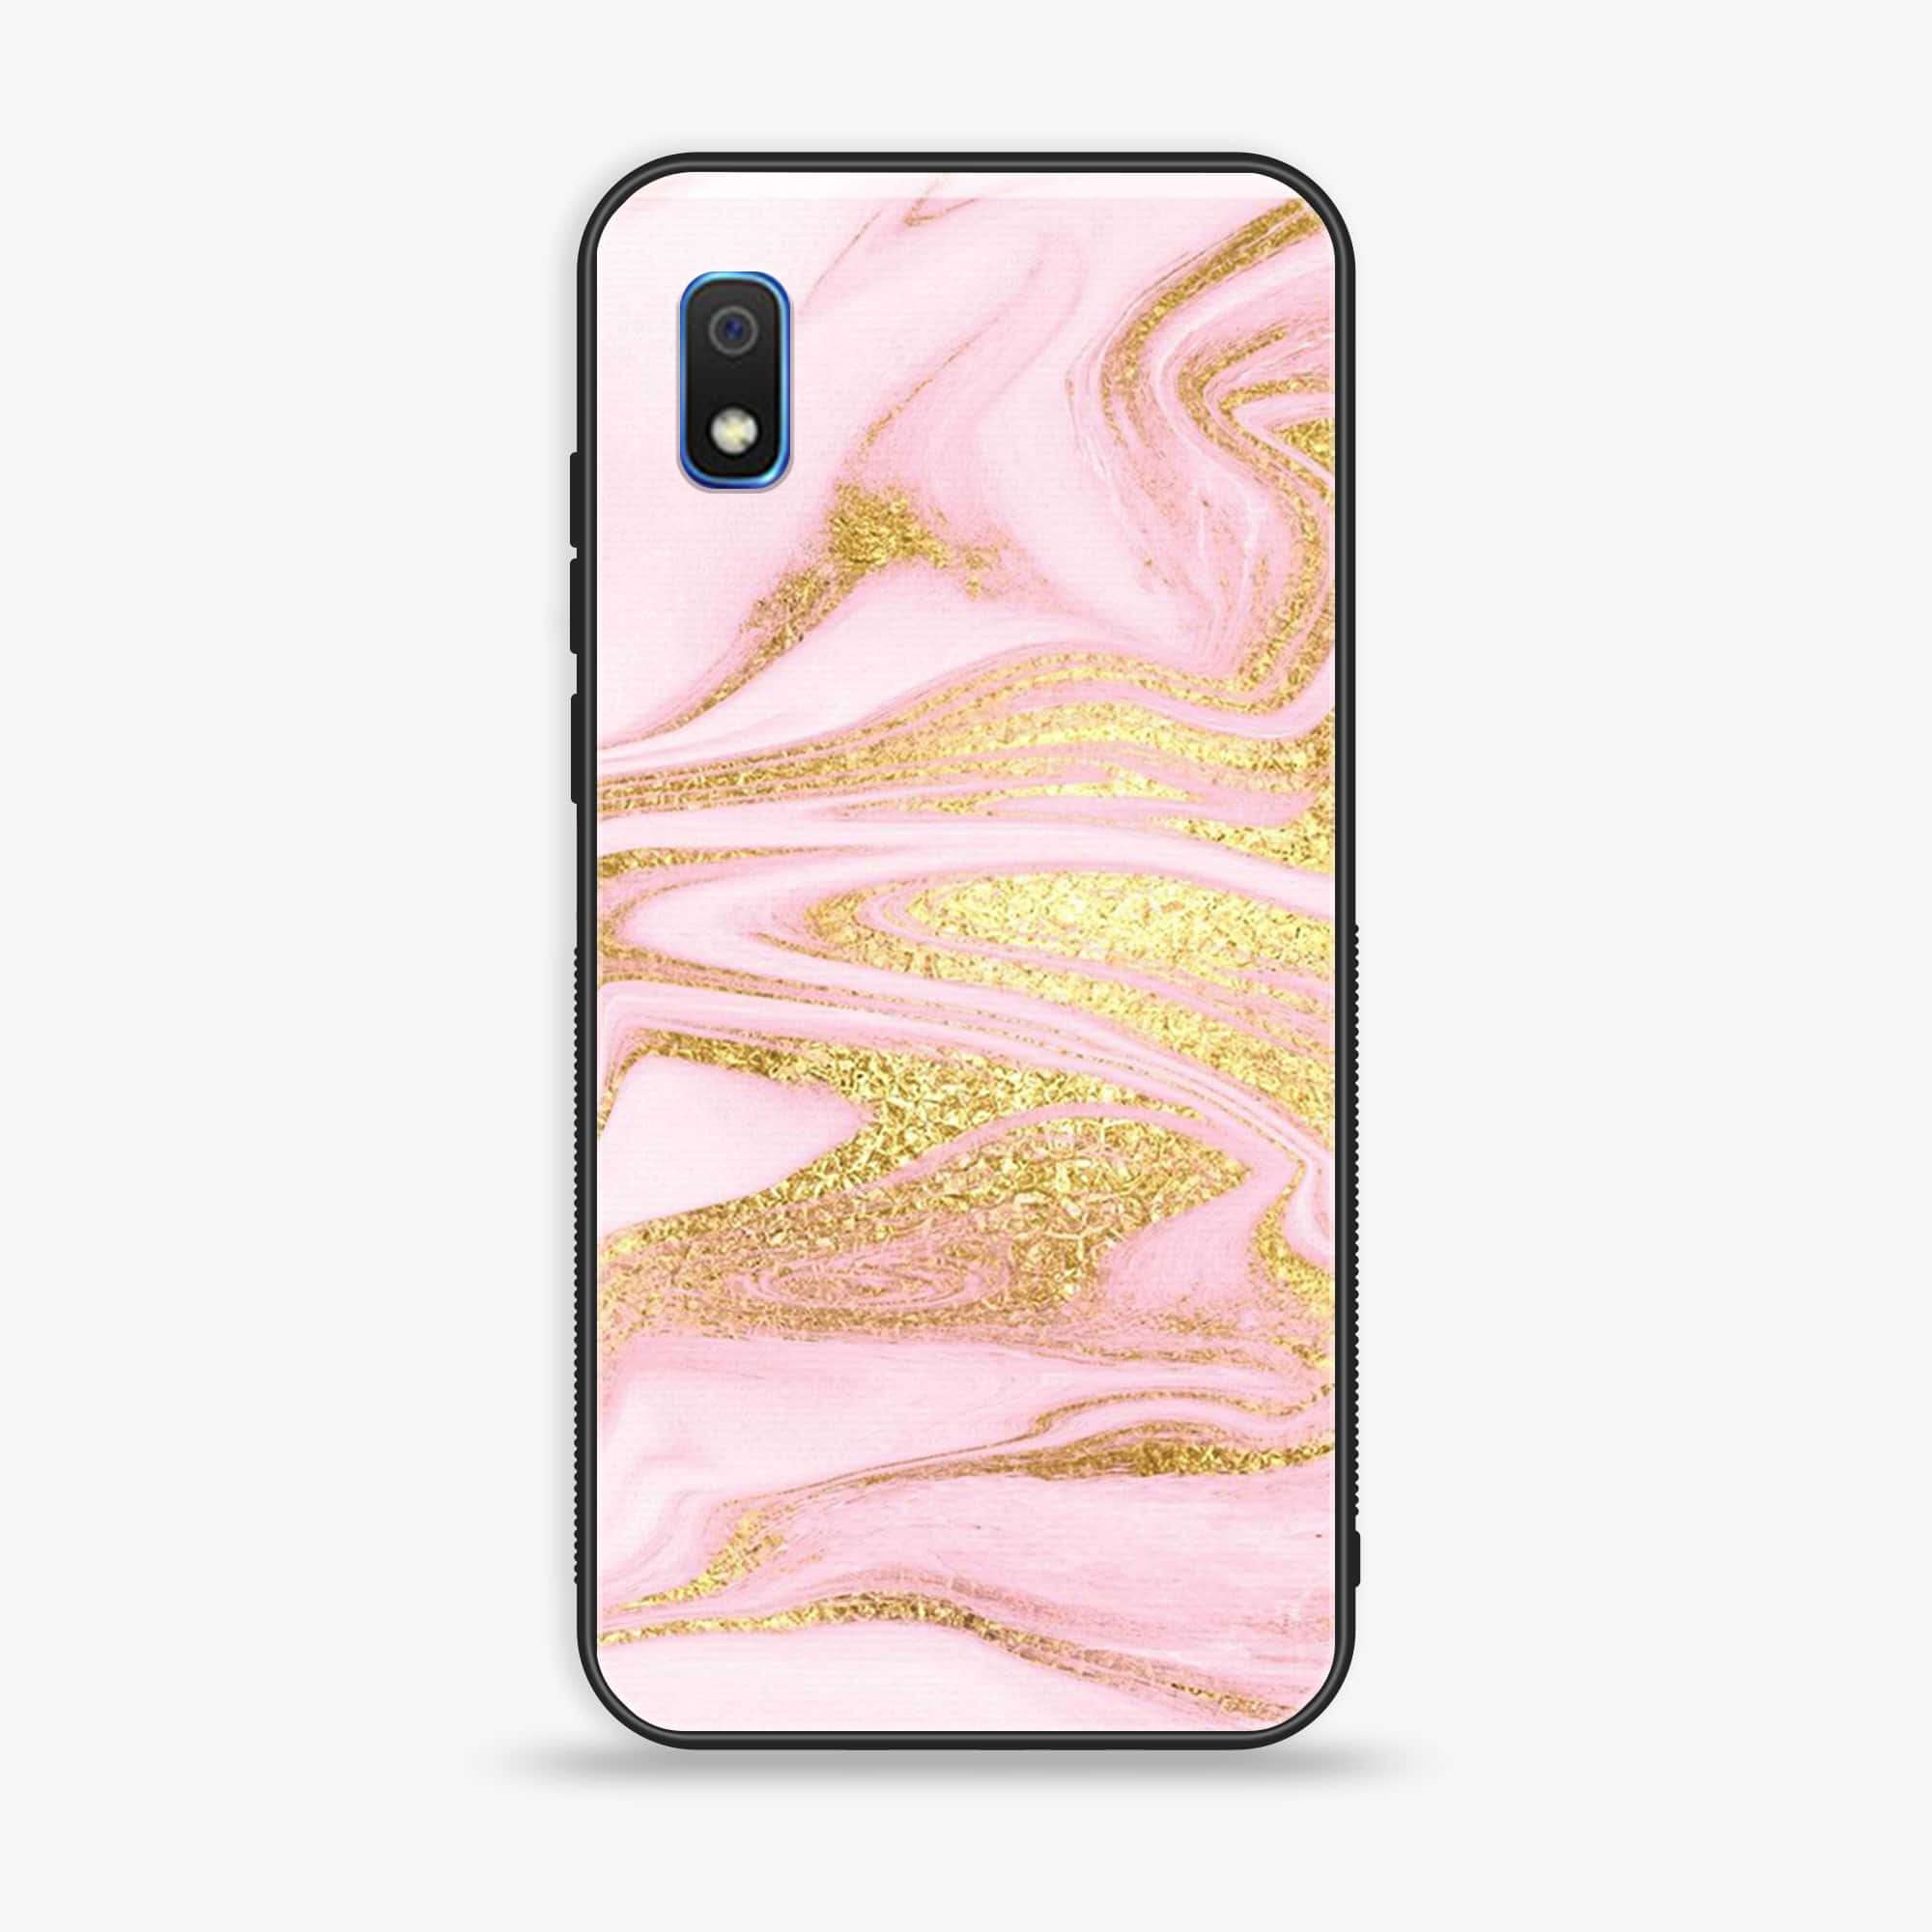 Samsung Galaxy A10 - Pink Marble Series - Premium Printed Glass soft Bumper shock Proof Case